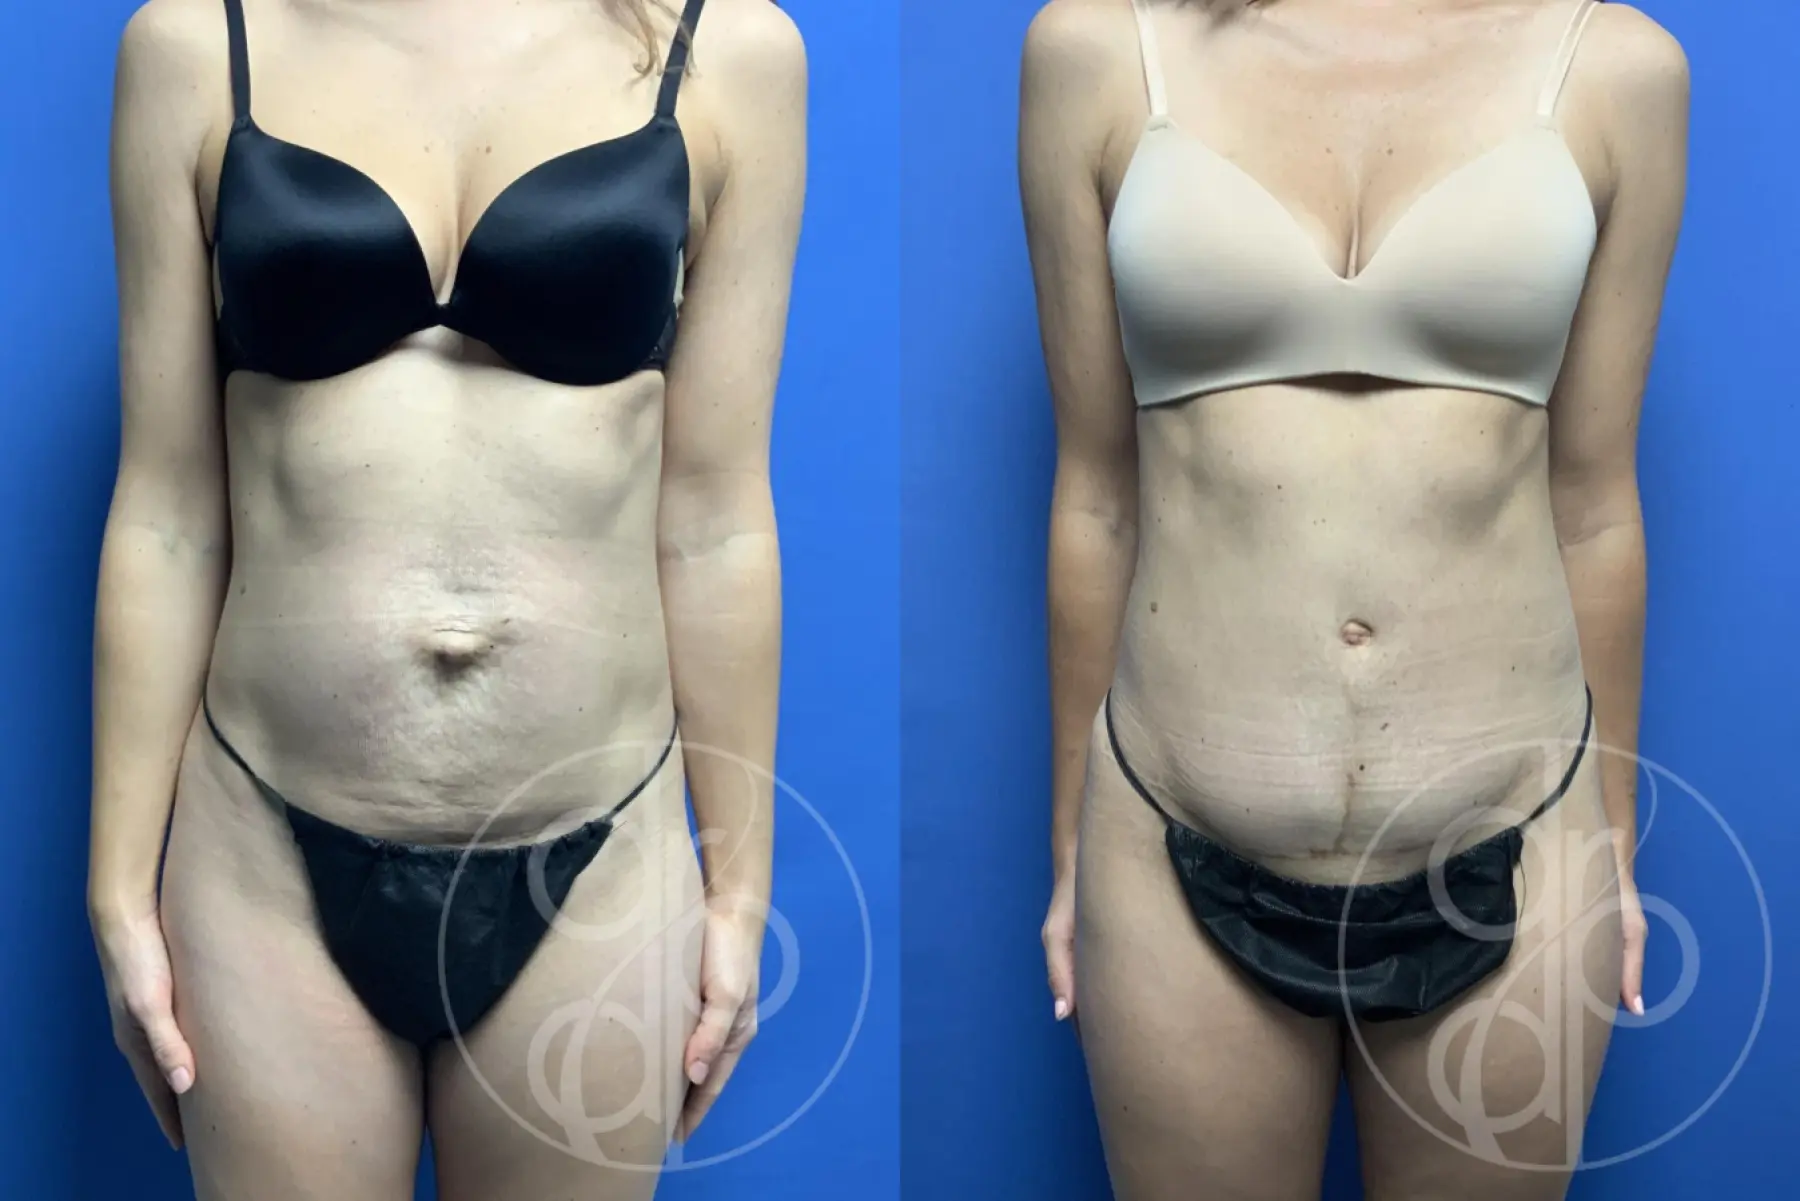 Abdominoplasty-for-men: Patient 1 - Before and After  